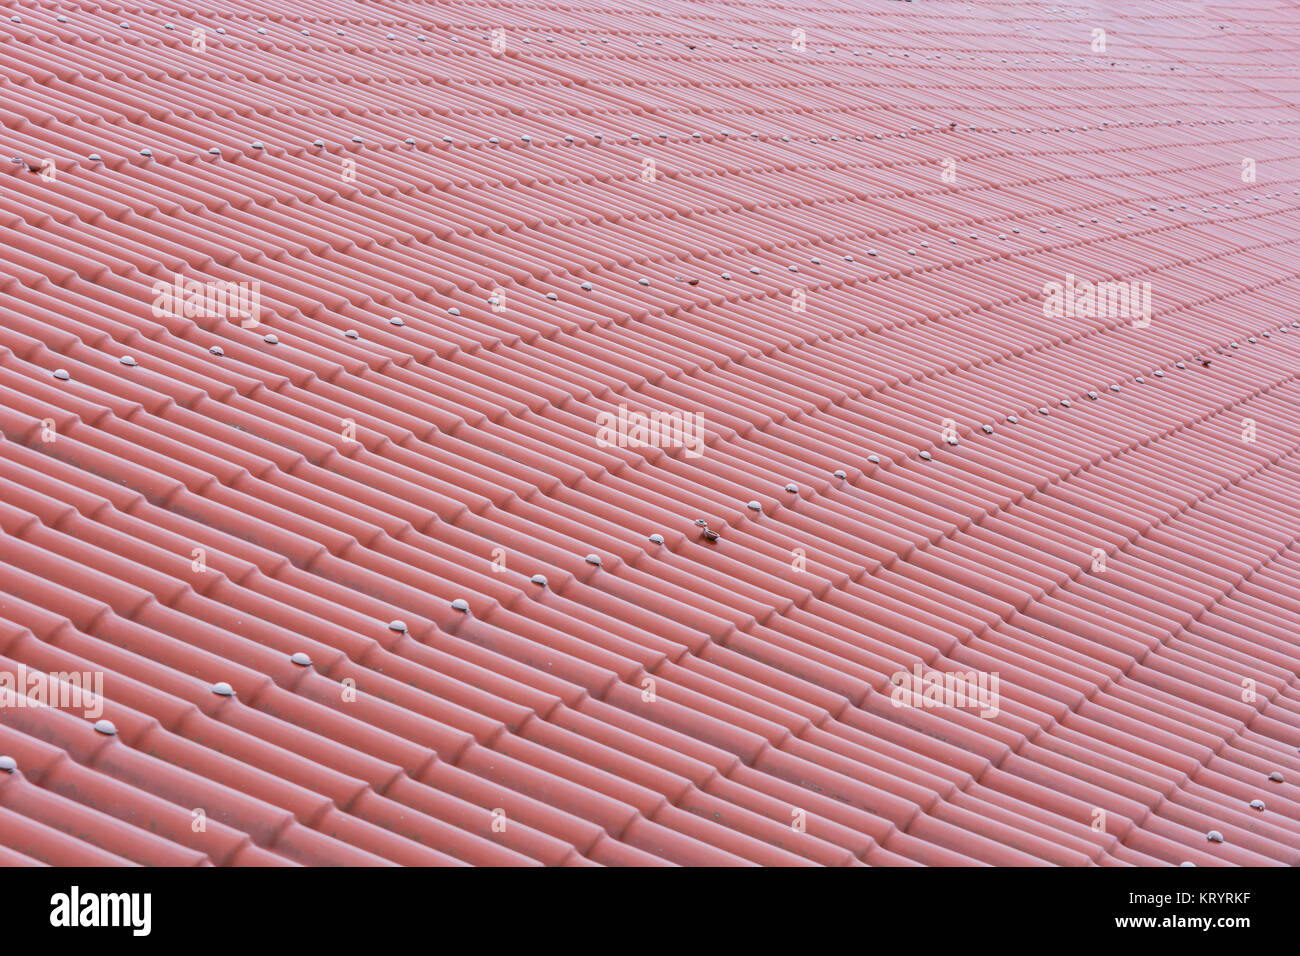 pattern of a red tile roof Stock Photo